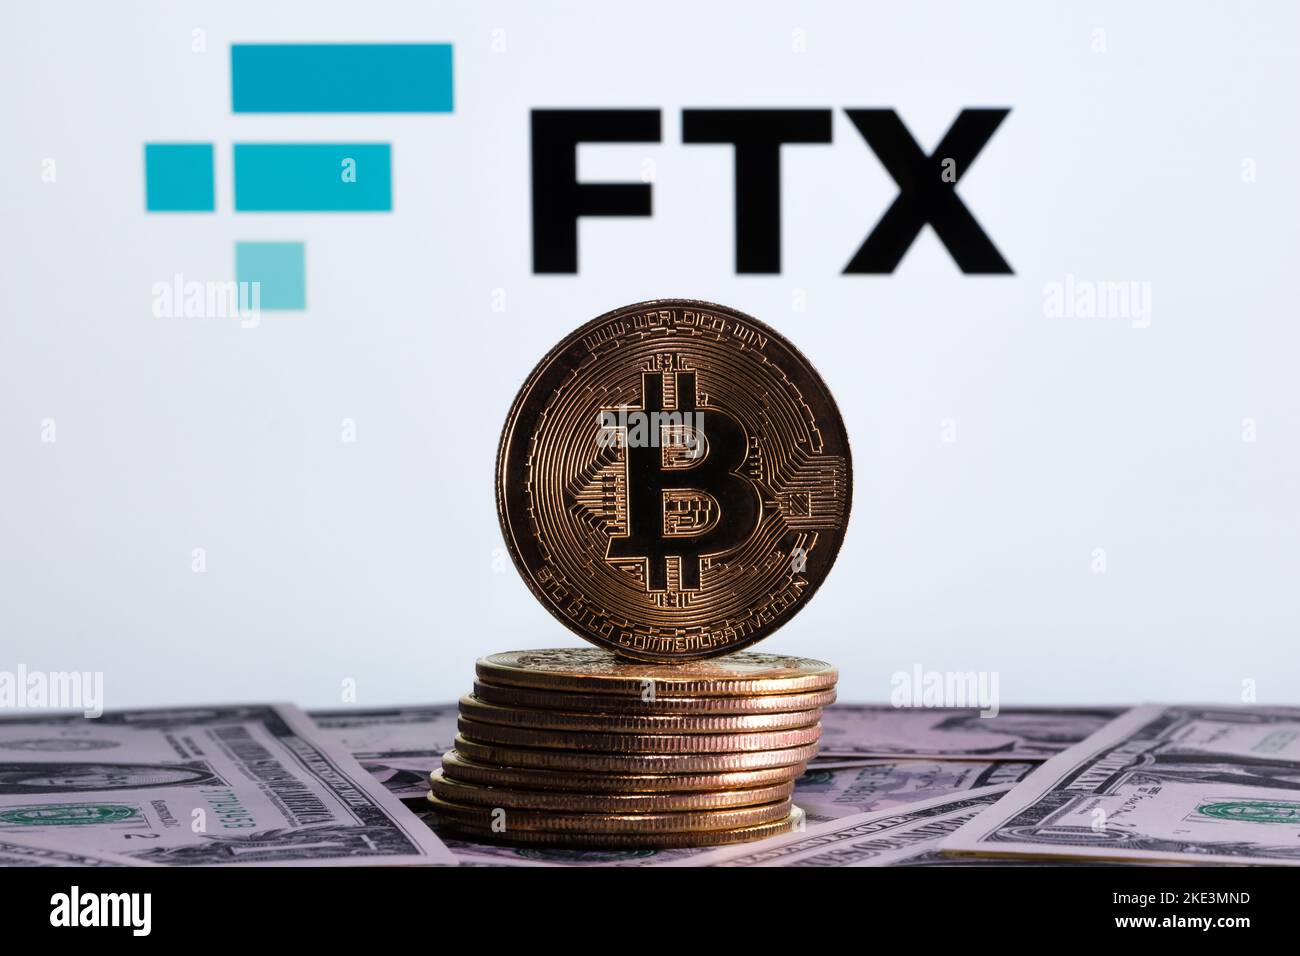 FTX Cryptocurrency Exchange bankruptcy concept. FTX logo seen on display, and stack of bitcoin tokens. Stafford, United Kindom, November 10, 2022. Stock Photo